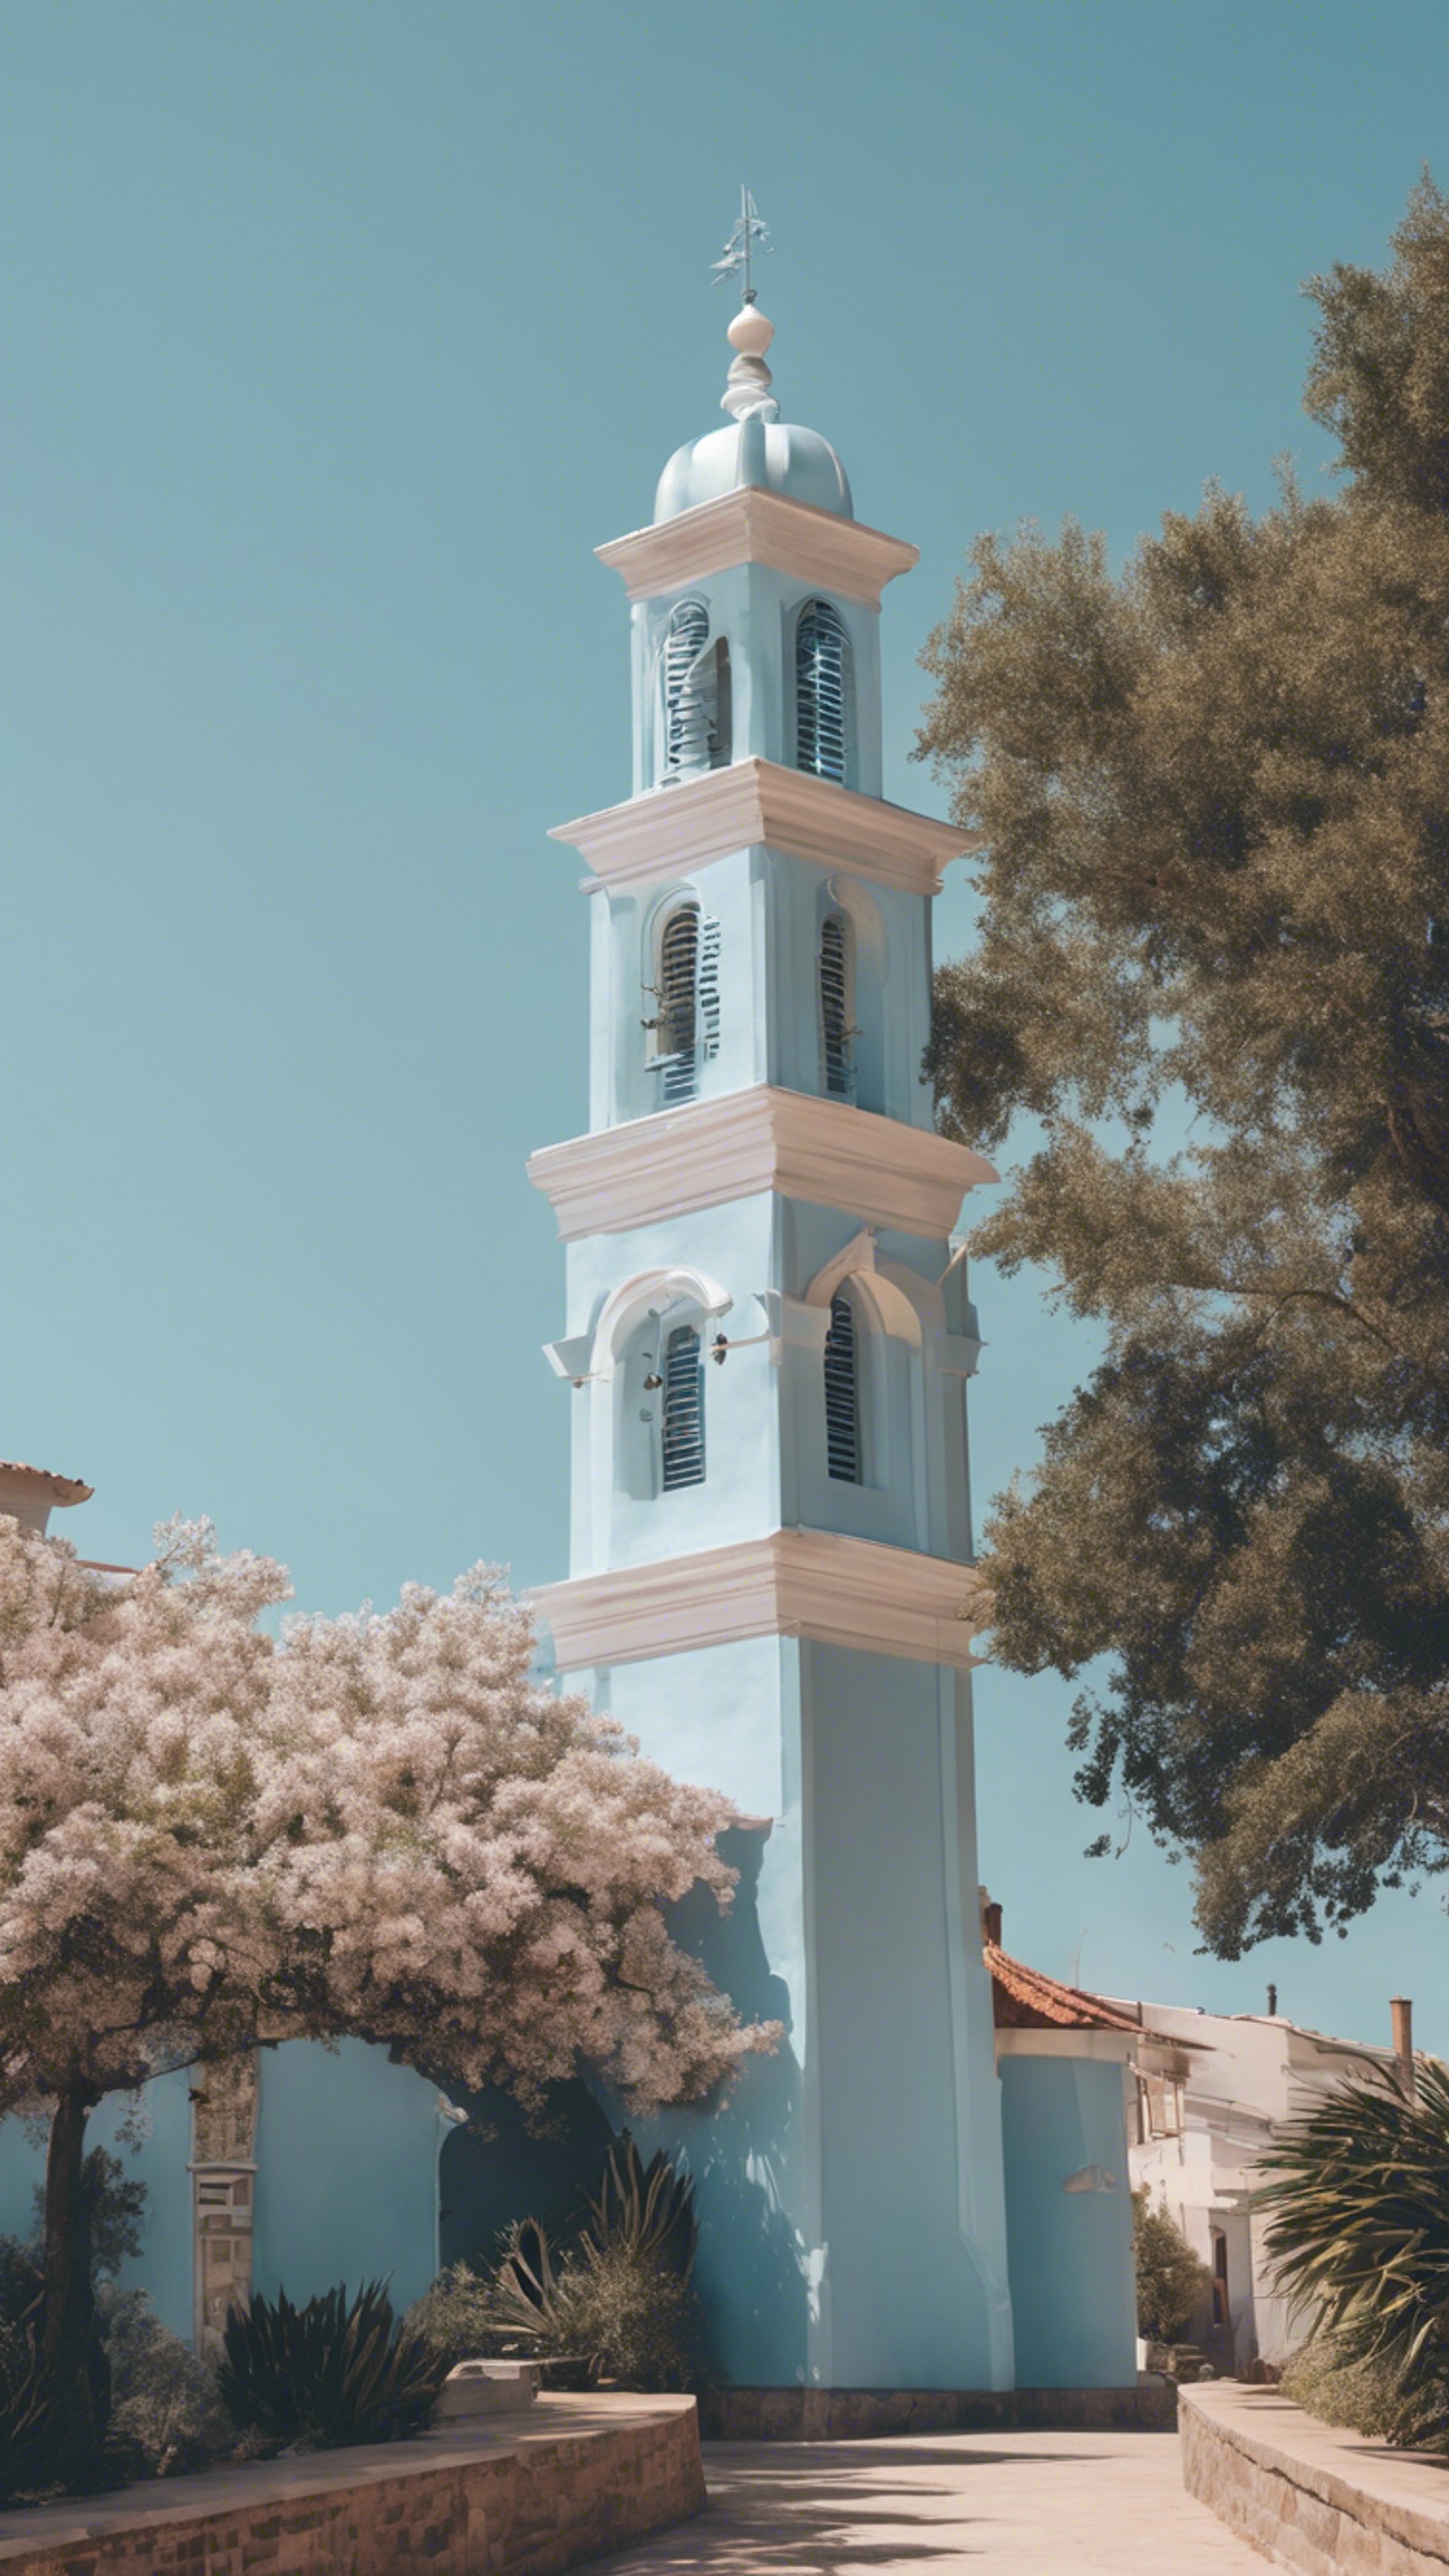 A stately pastel blue bell tower against a clear, sunny sky in a coastal town. Шпалери[a05c52dcc3054b35b6be]